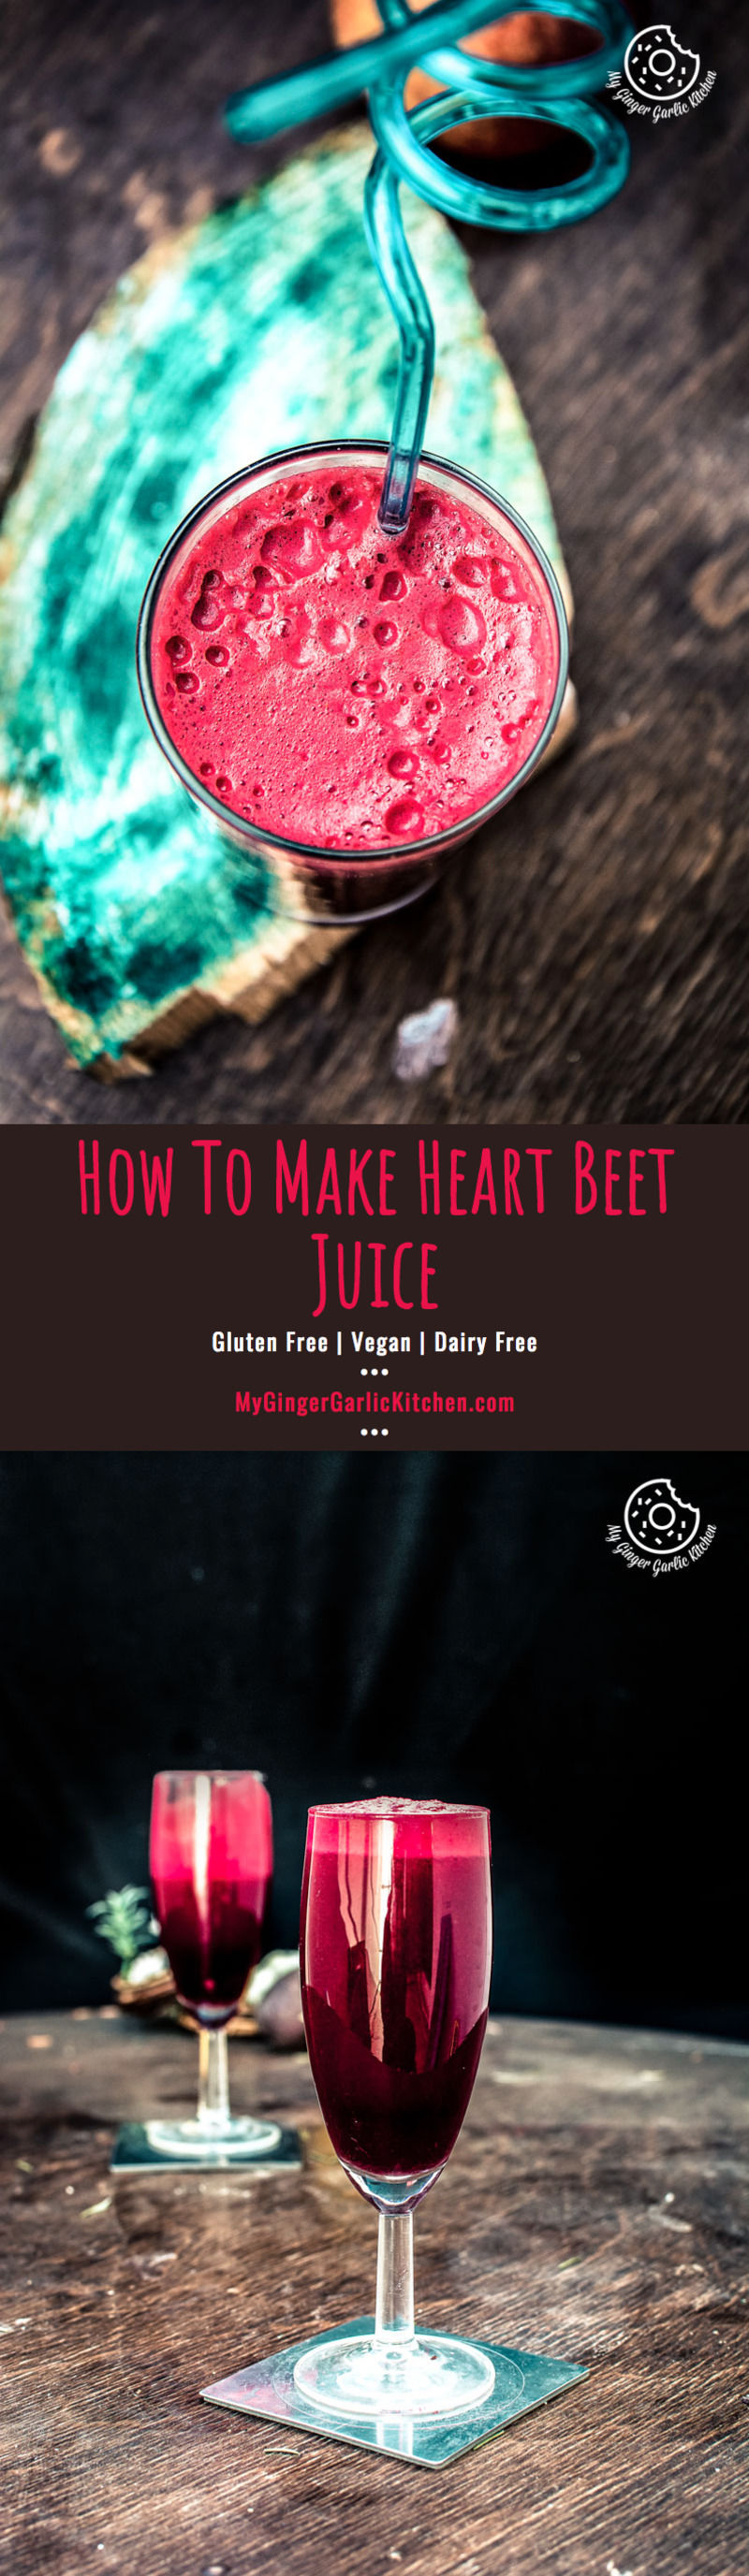 two glasses of detox heart beet juice on a wooden table